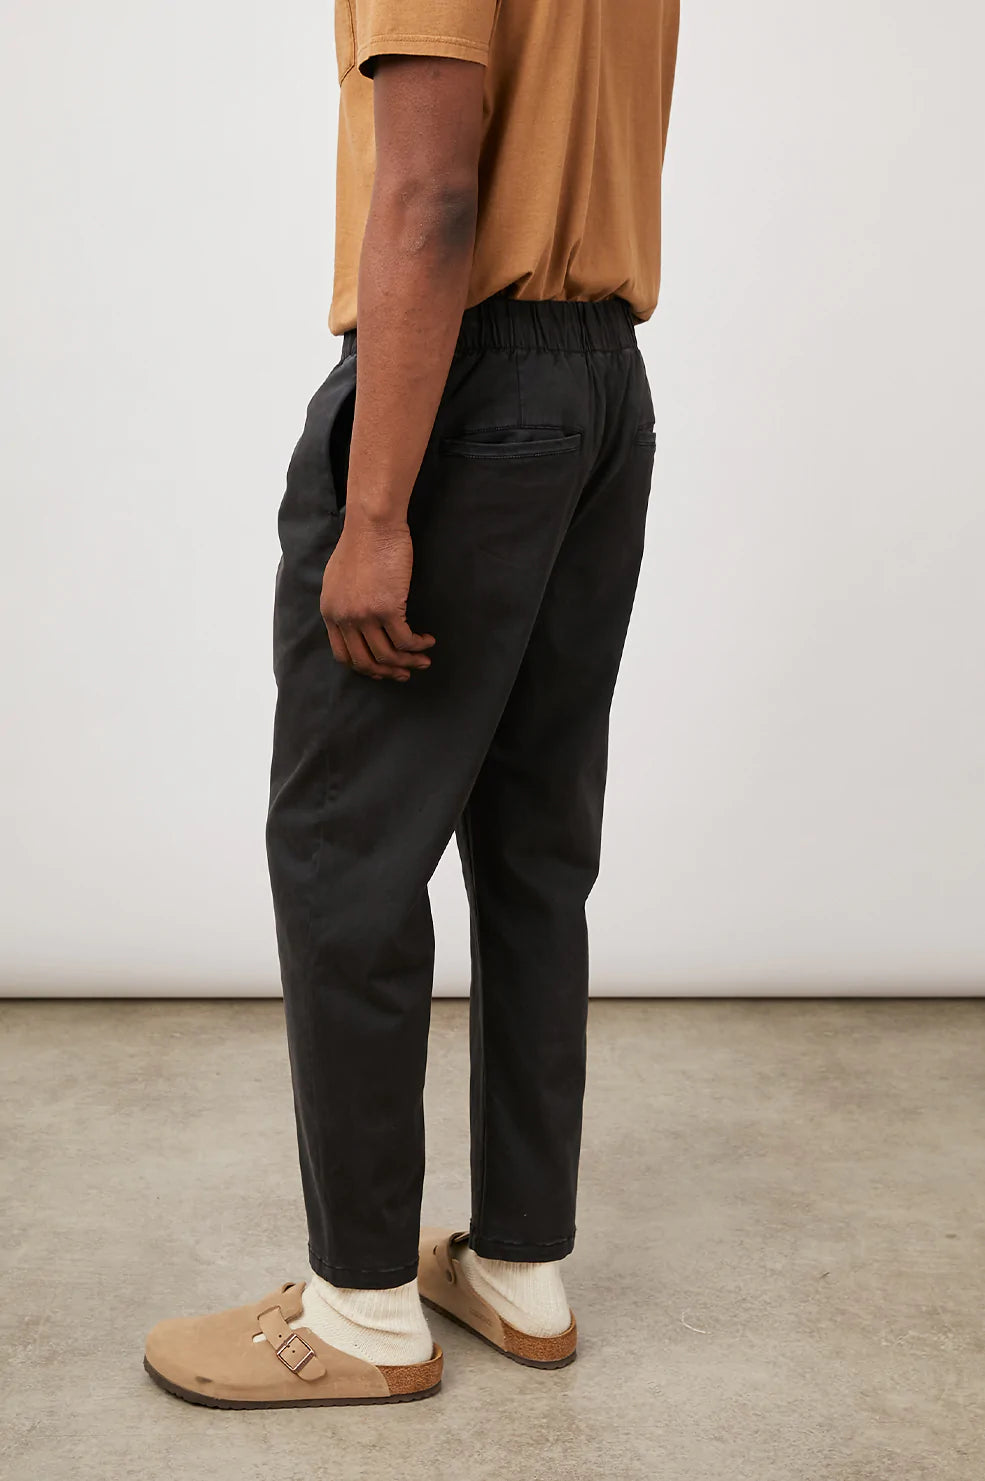 these comfortable pants are half way in between a relaxed and slim fit with an elastic waistband  52% Cotton | 46% Modal | 2% Spandex.  fits true to size